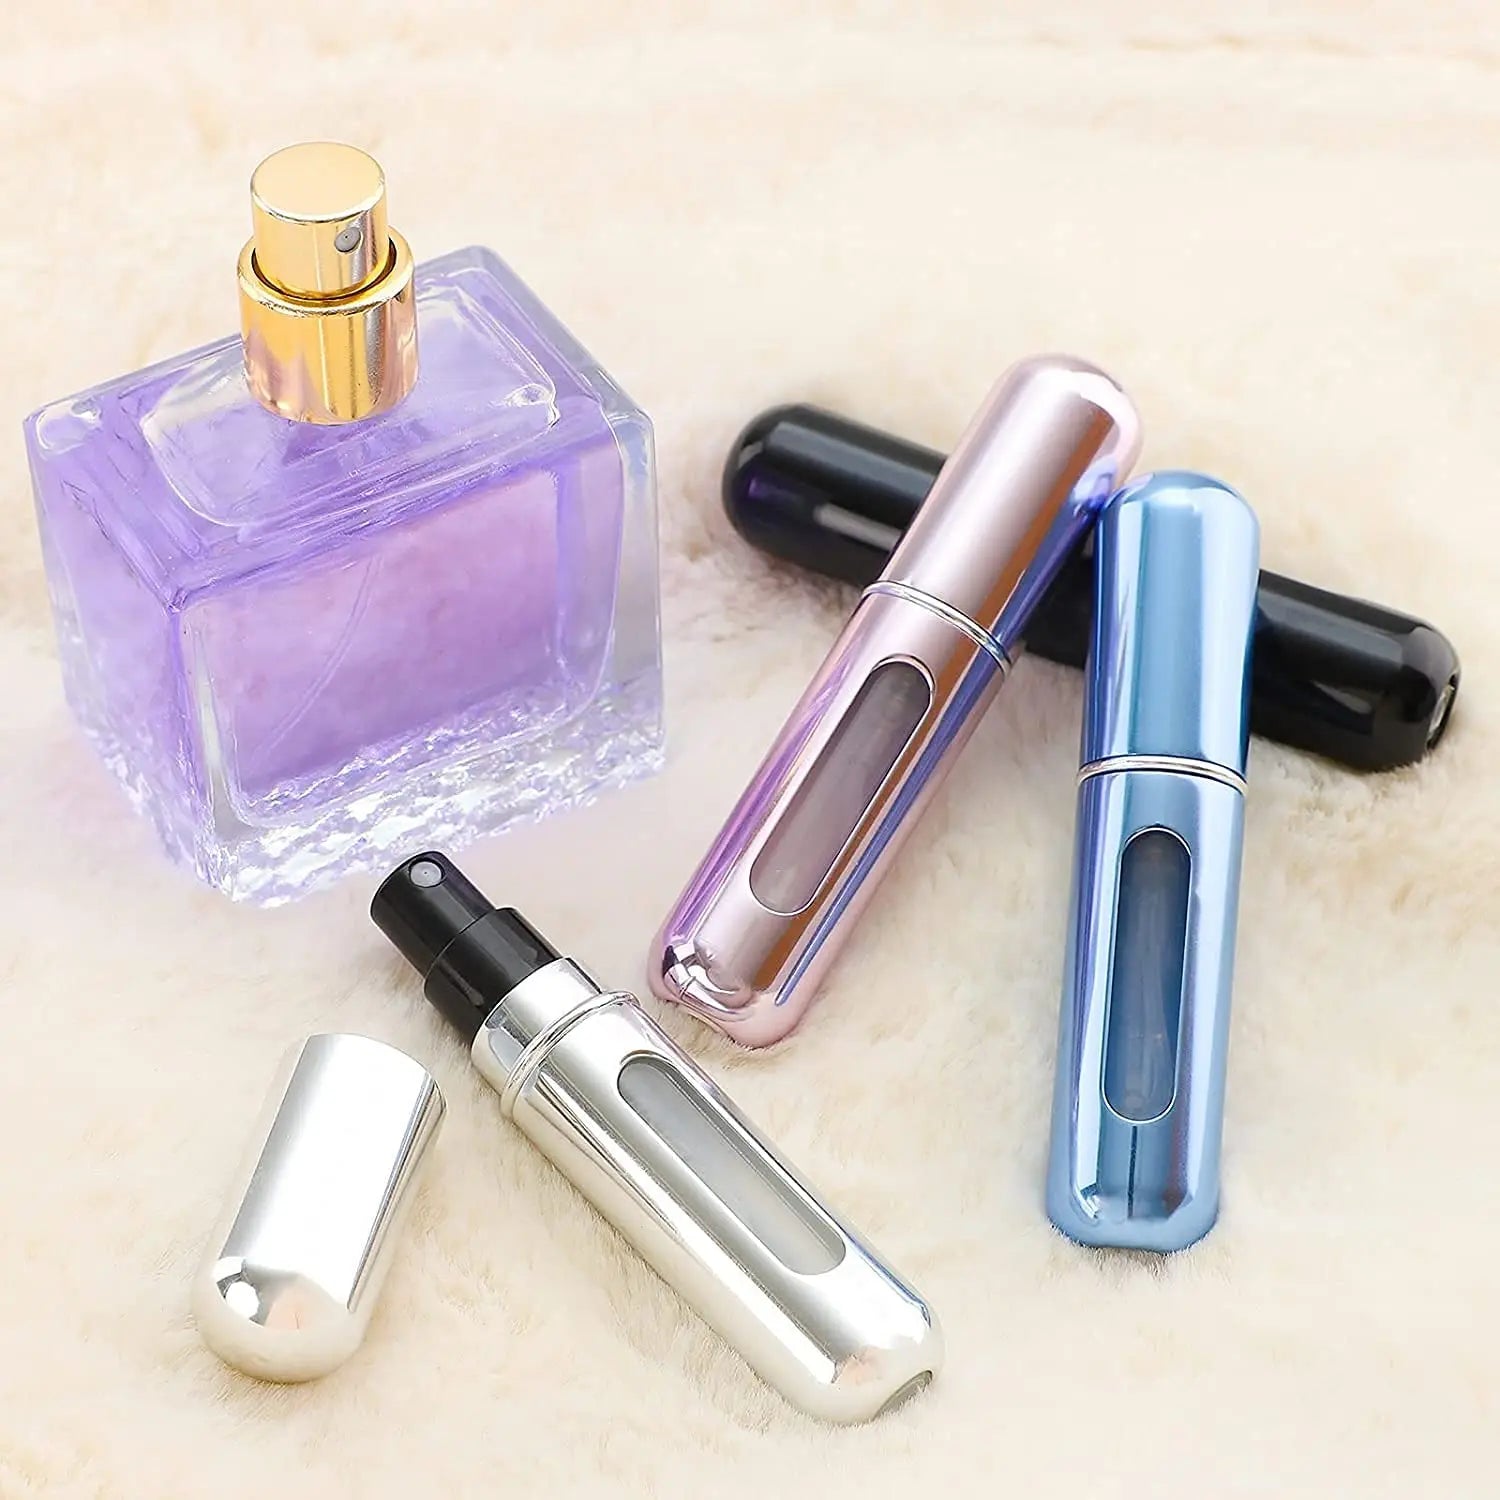 Leak-proof Travel Perfume Atomizer - 5ml or 8ml Capacity (Choose Your Size!)